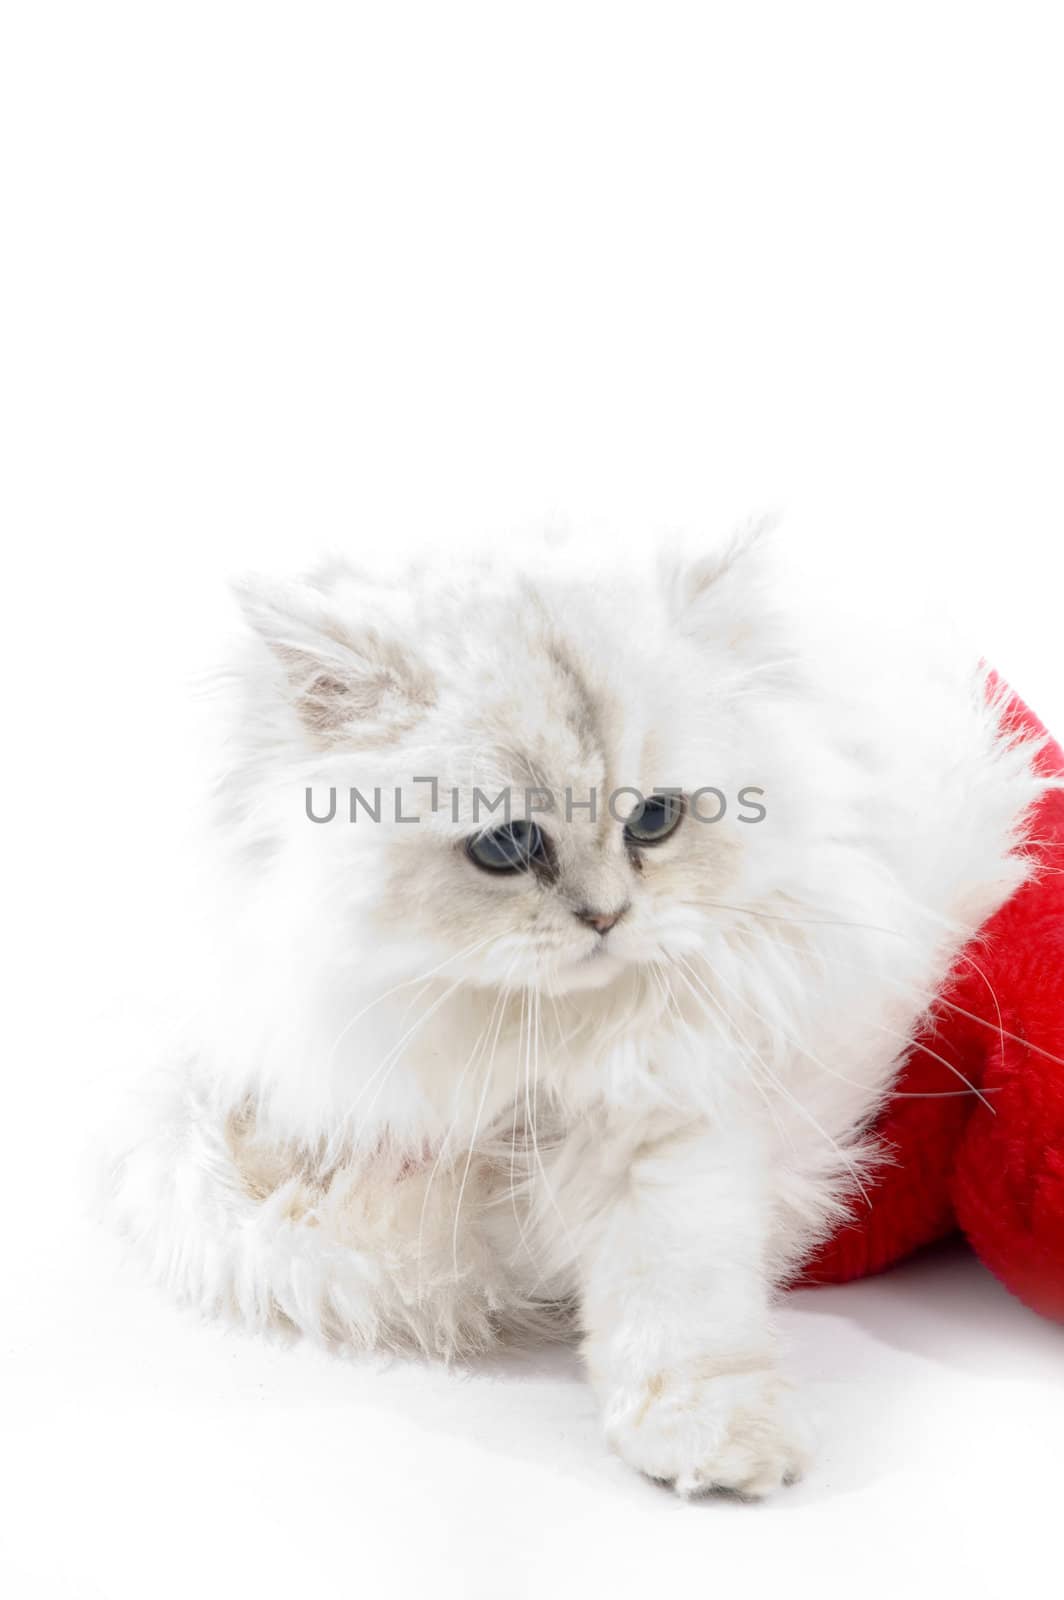 cute white cat wearing christmas hat by imagerymajestic